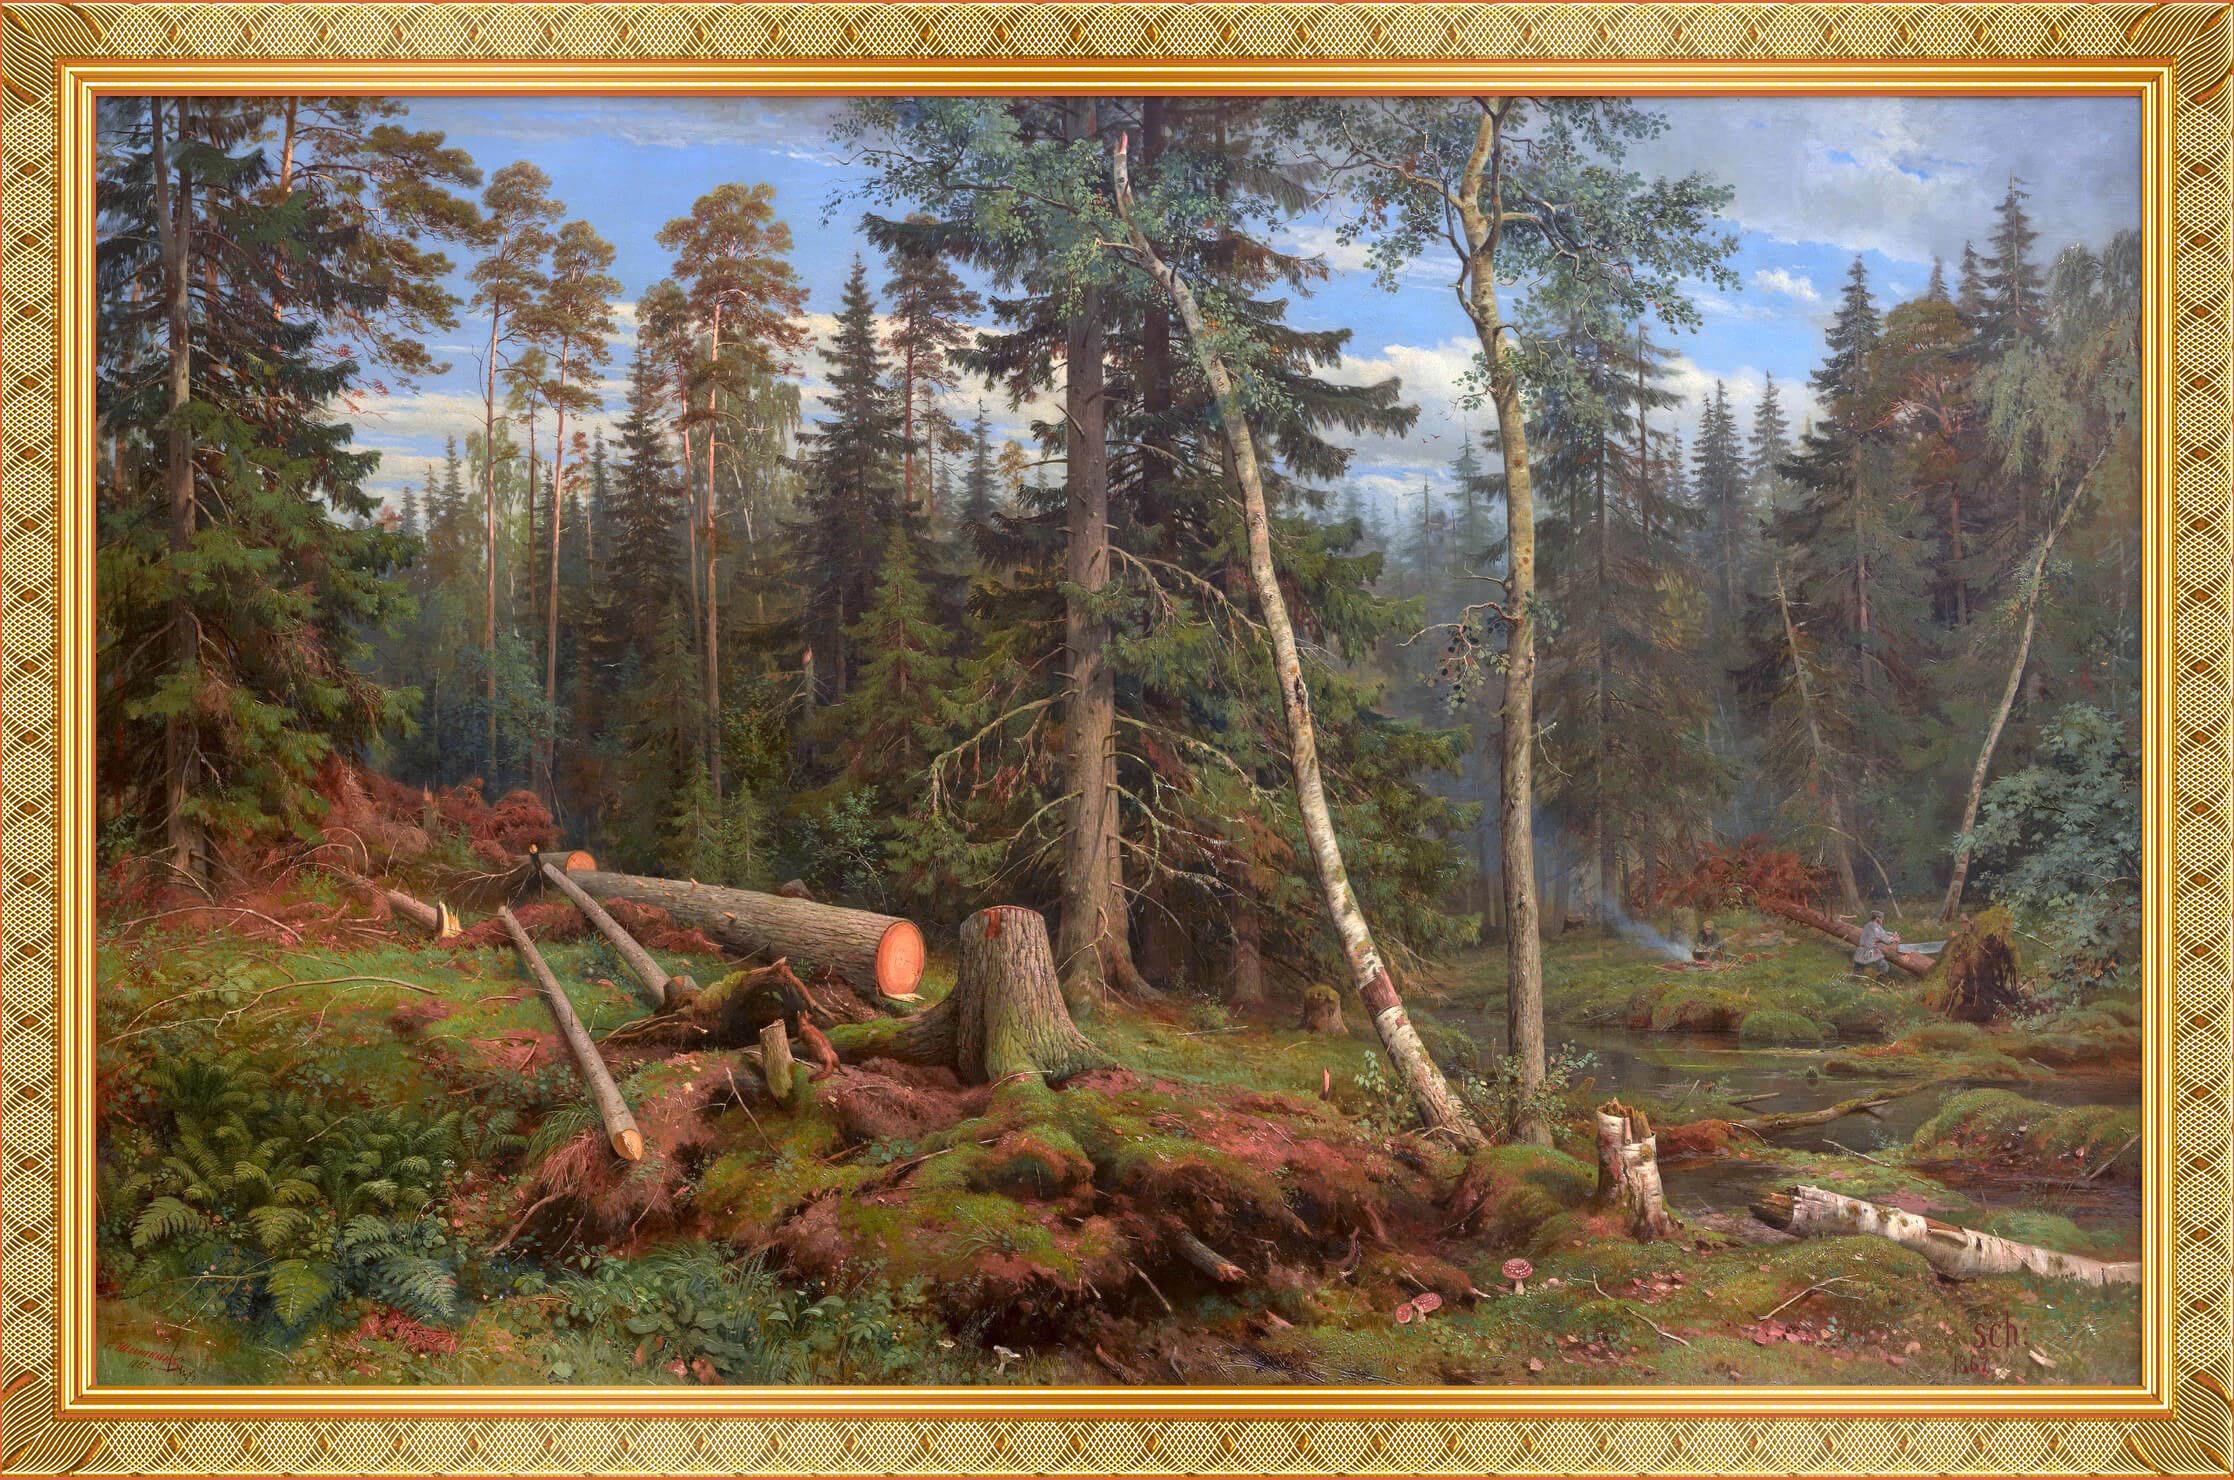 Picture Reproduction - Logging 4